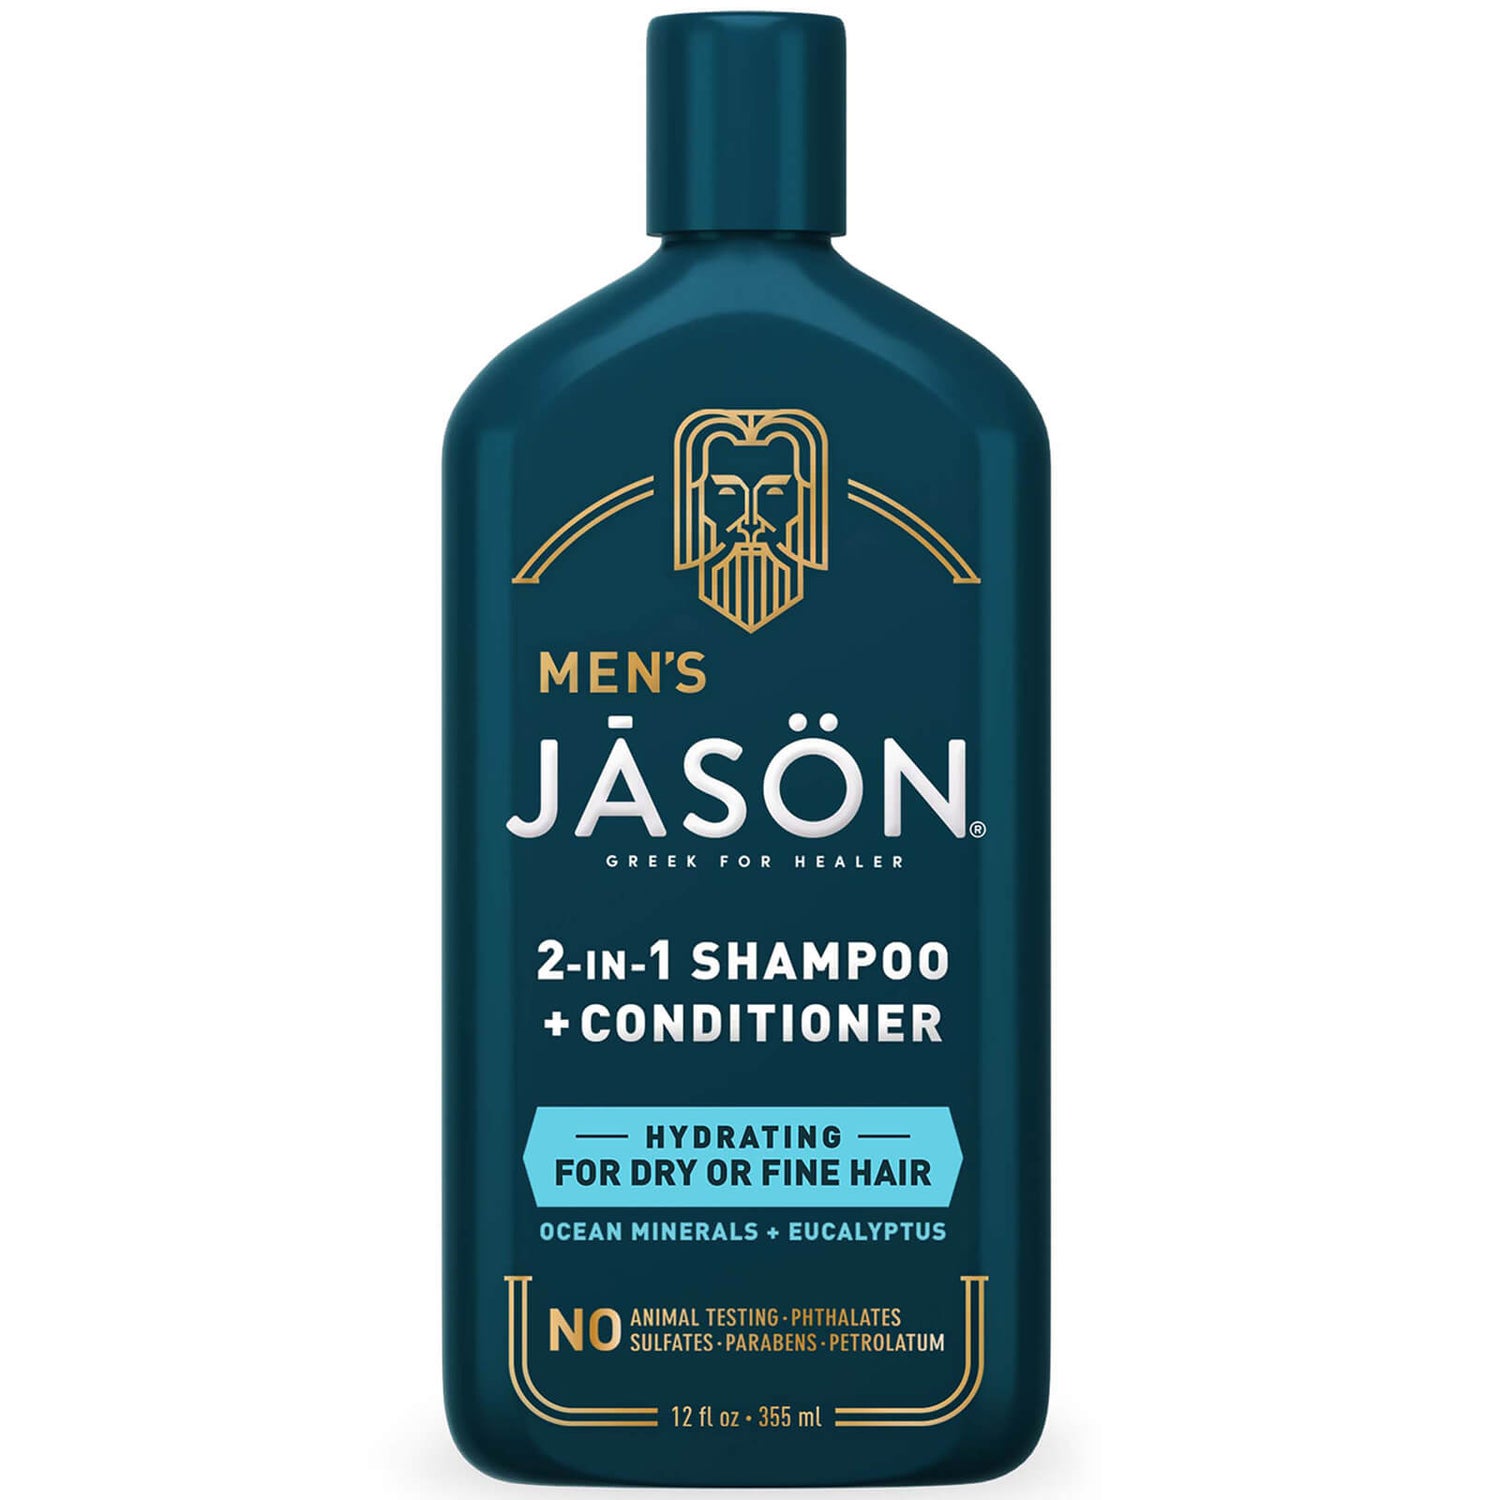 JASON Men's Hydrating 2-in-1 Shampoo and Conditioner 335ml